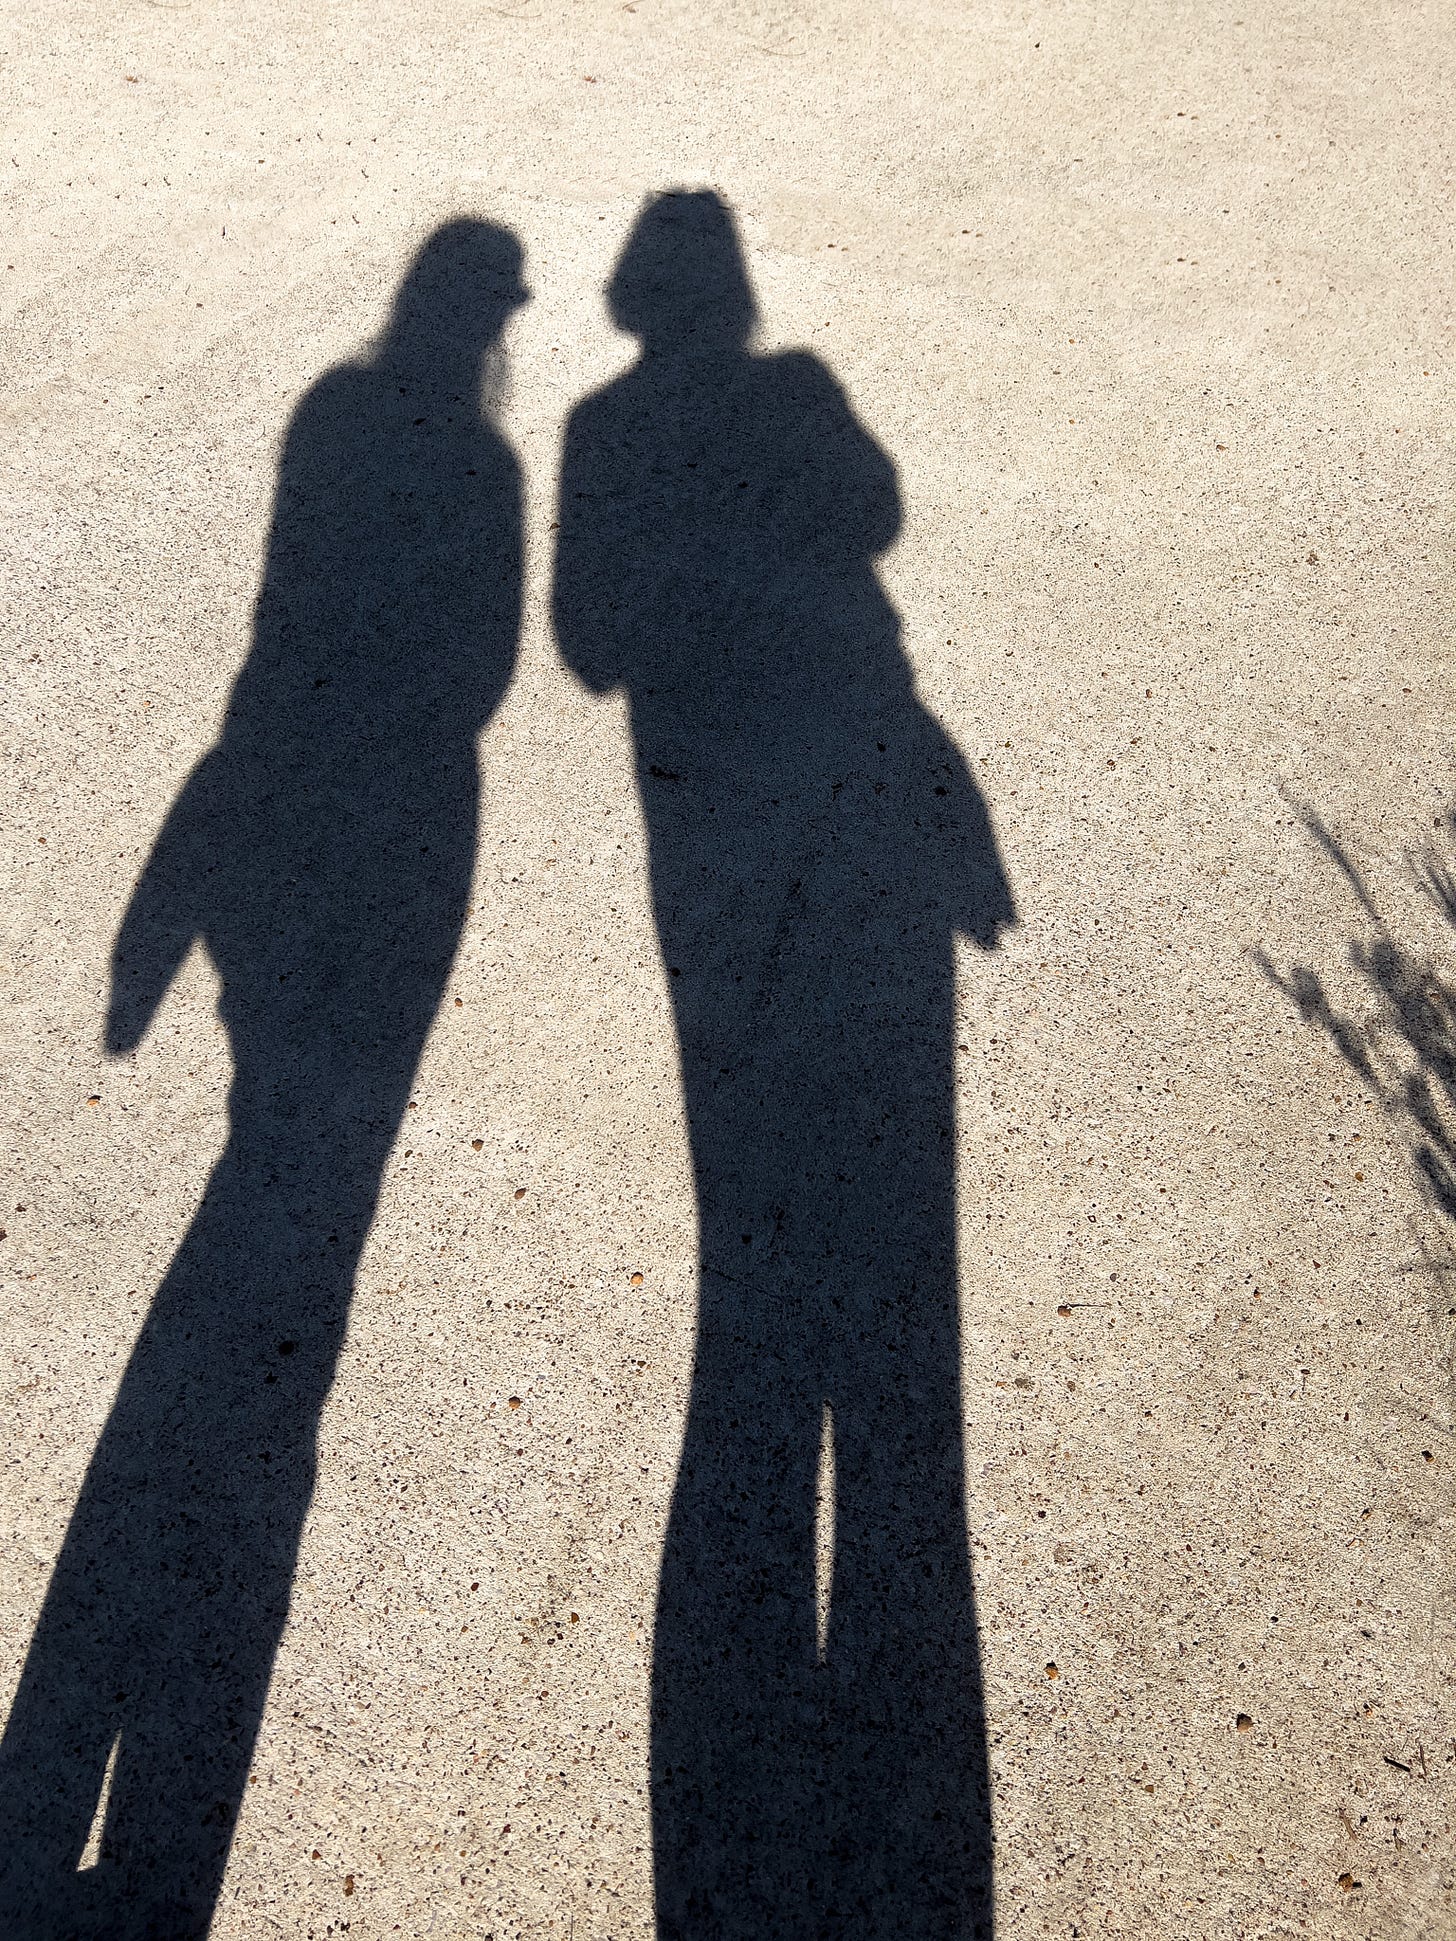 Shadow of two women standing side-by-side